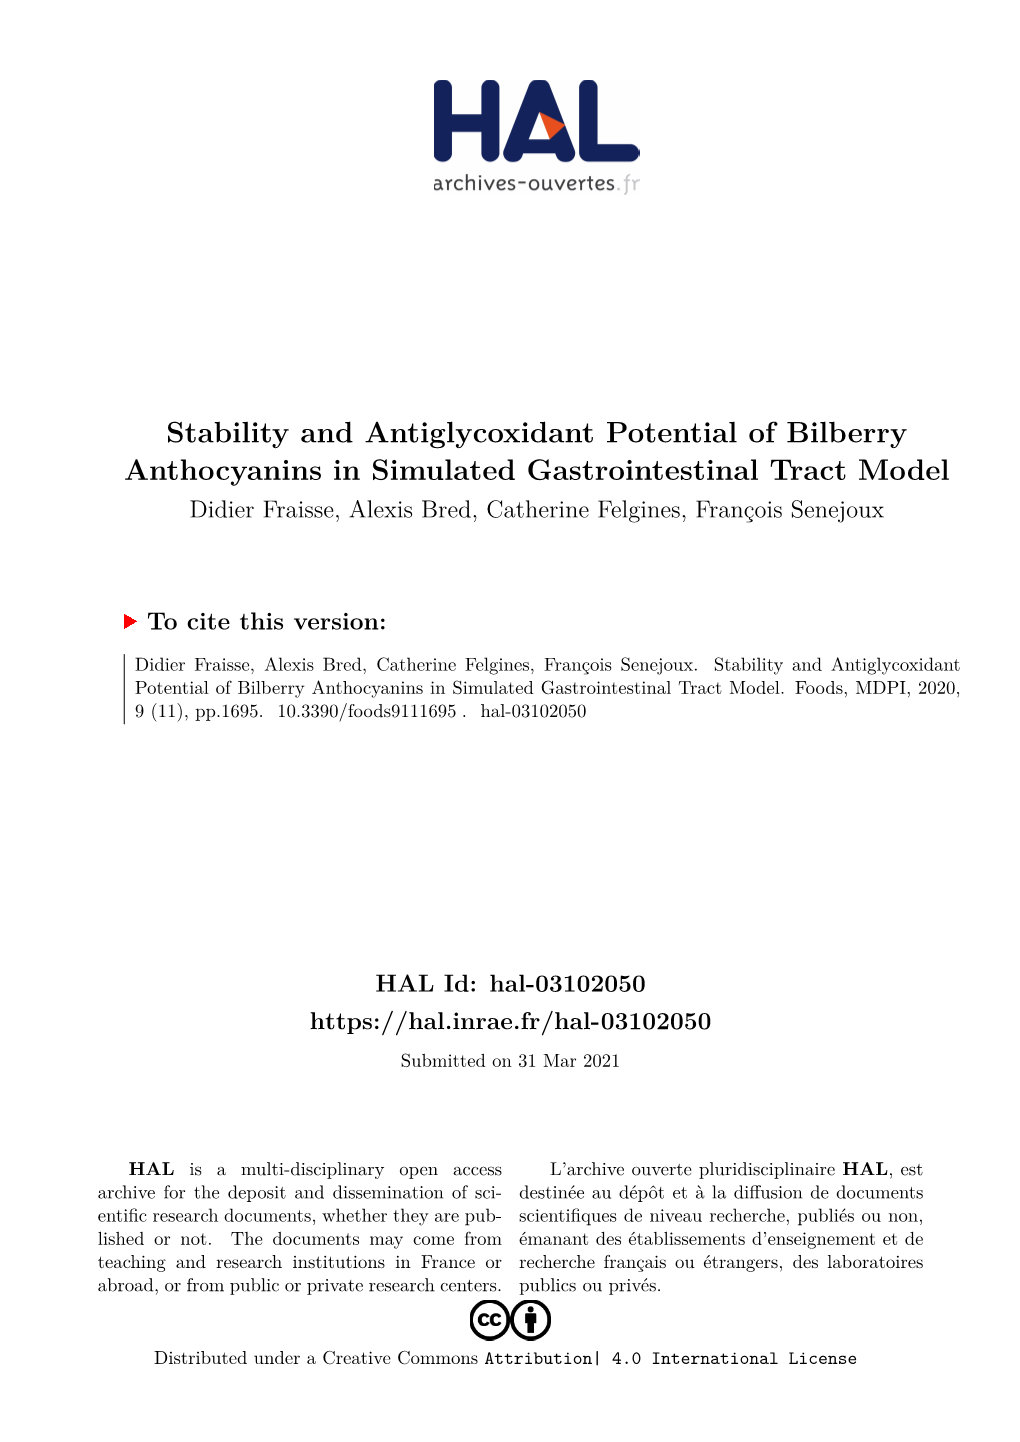 Stability and Antiglycoxidant Potential of Bilberry